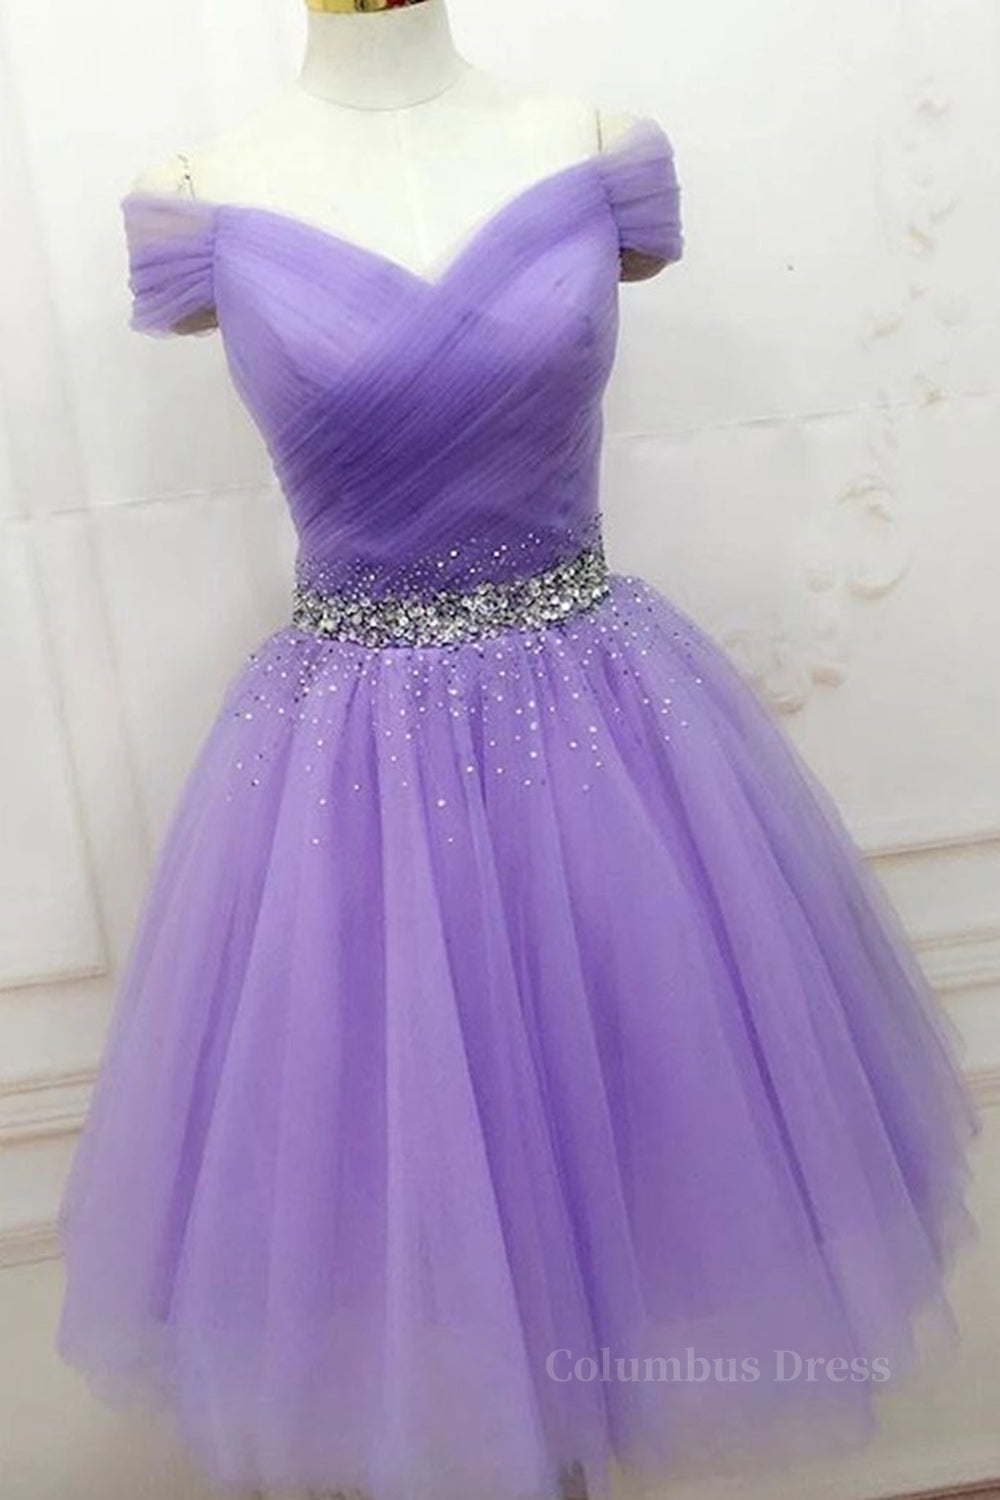 Off Shoulder Sequins Purple Short Corset Prom Dresses, Off the Shoulder Purple Corset Homecoming Dresses, Short Purple Corset Formal Evening Dresses outfit, Party Outfit